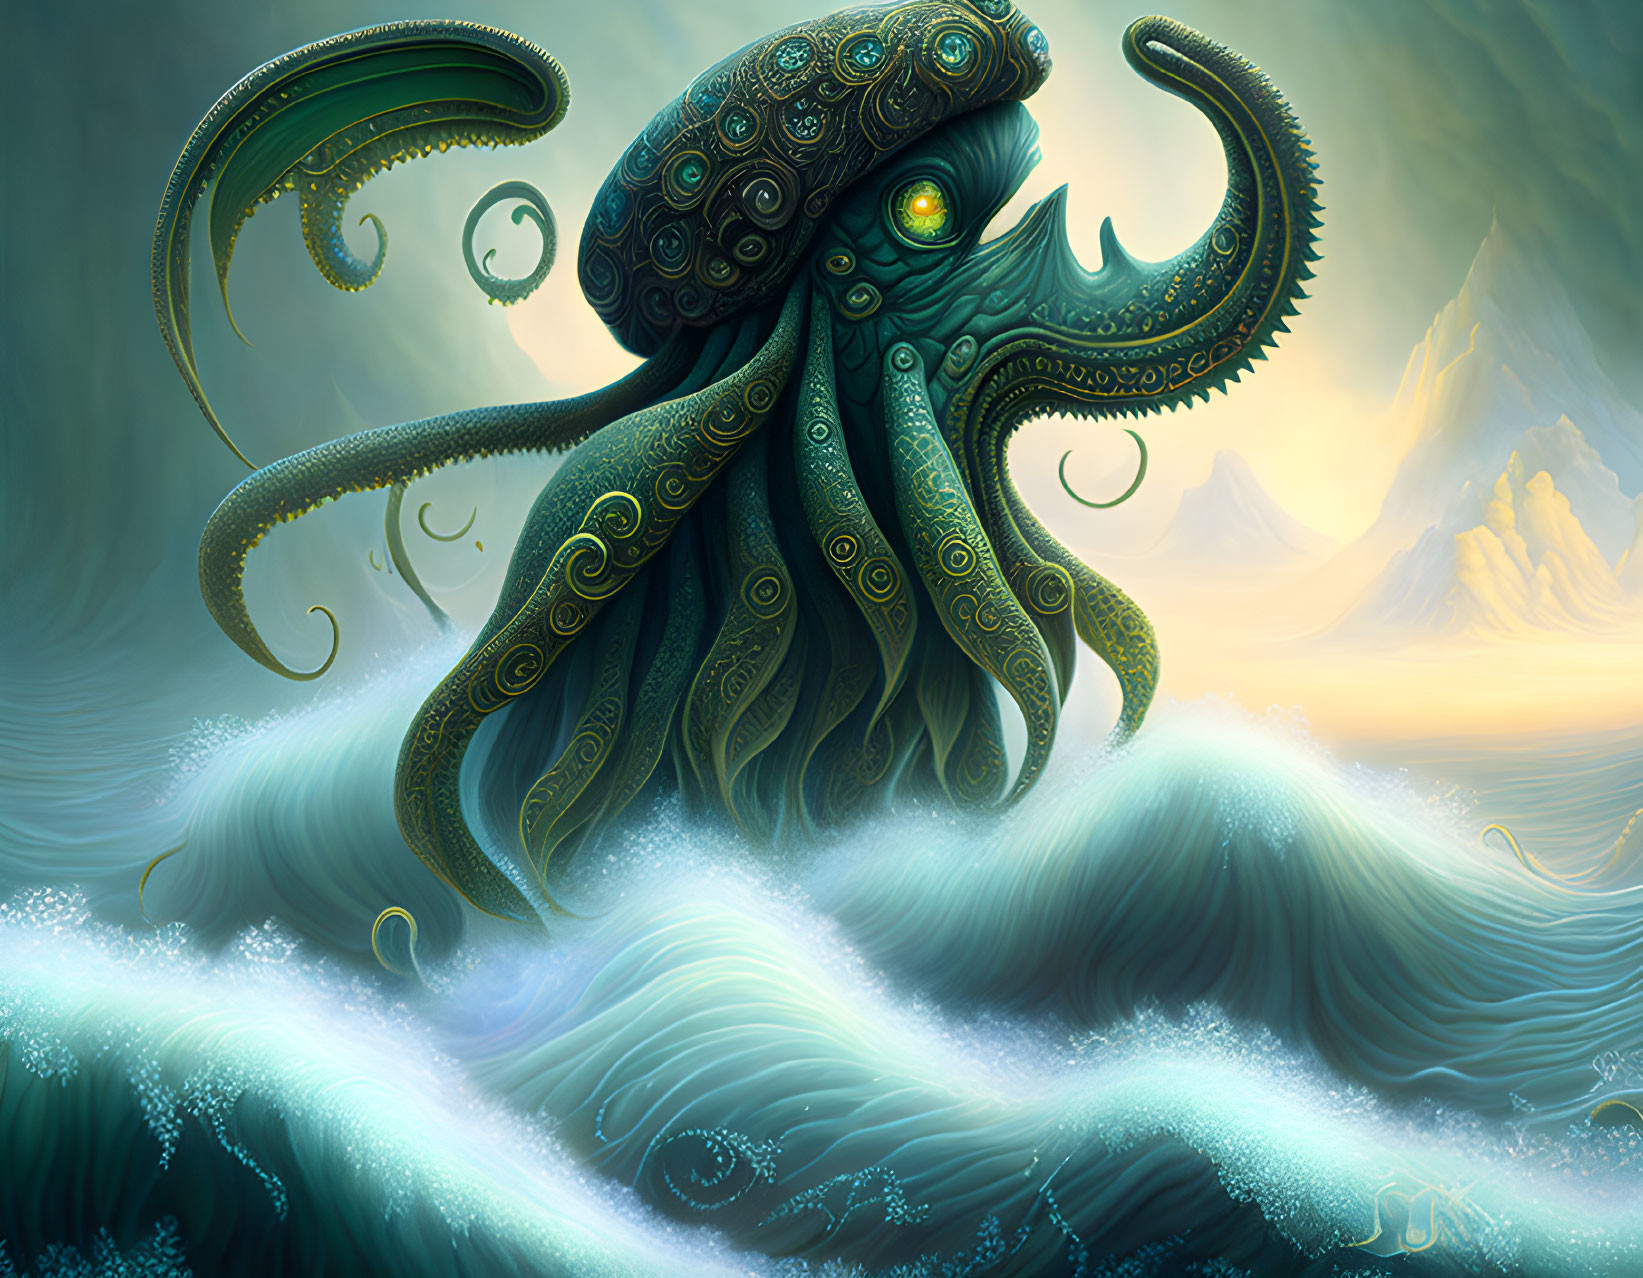 Detailed illustration of mythical octopus-like creature in churning ocean waves under misty mountains